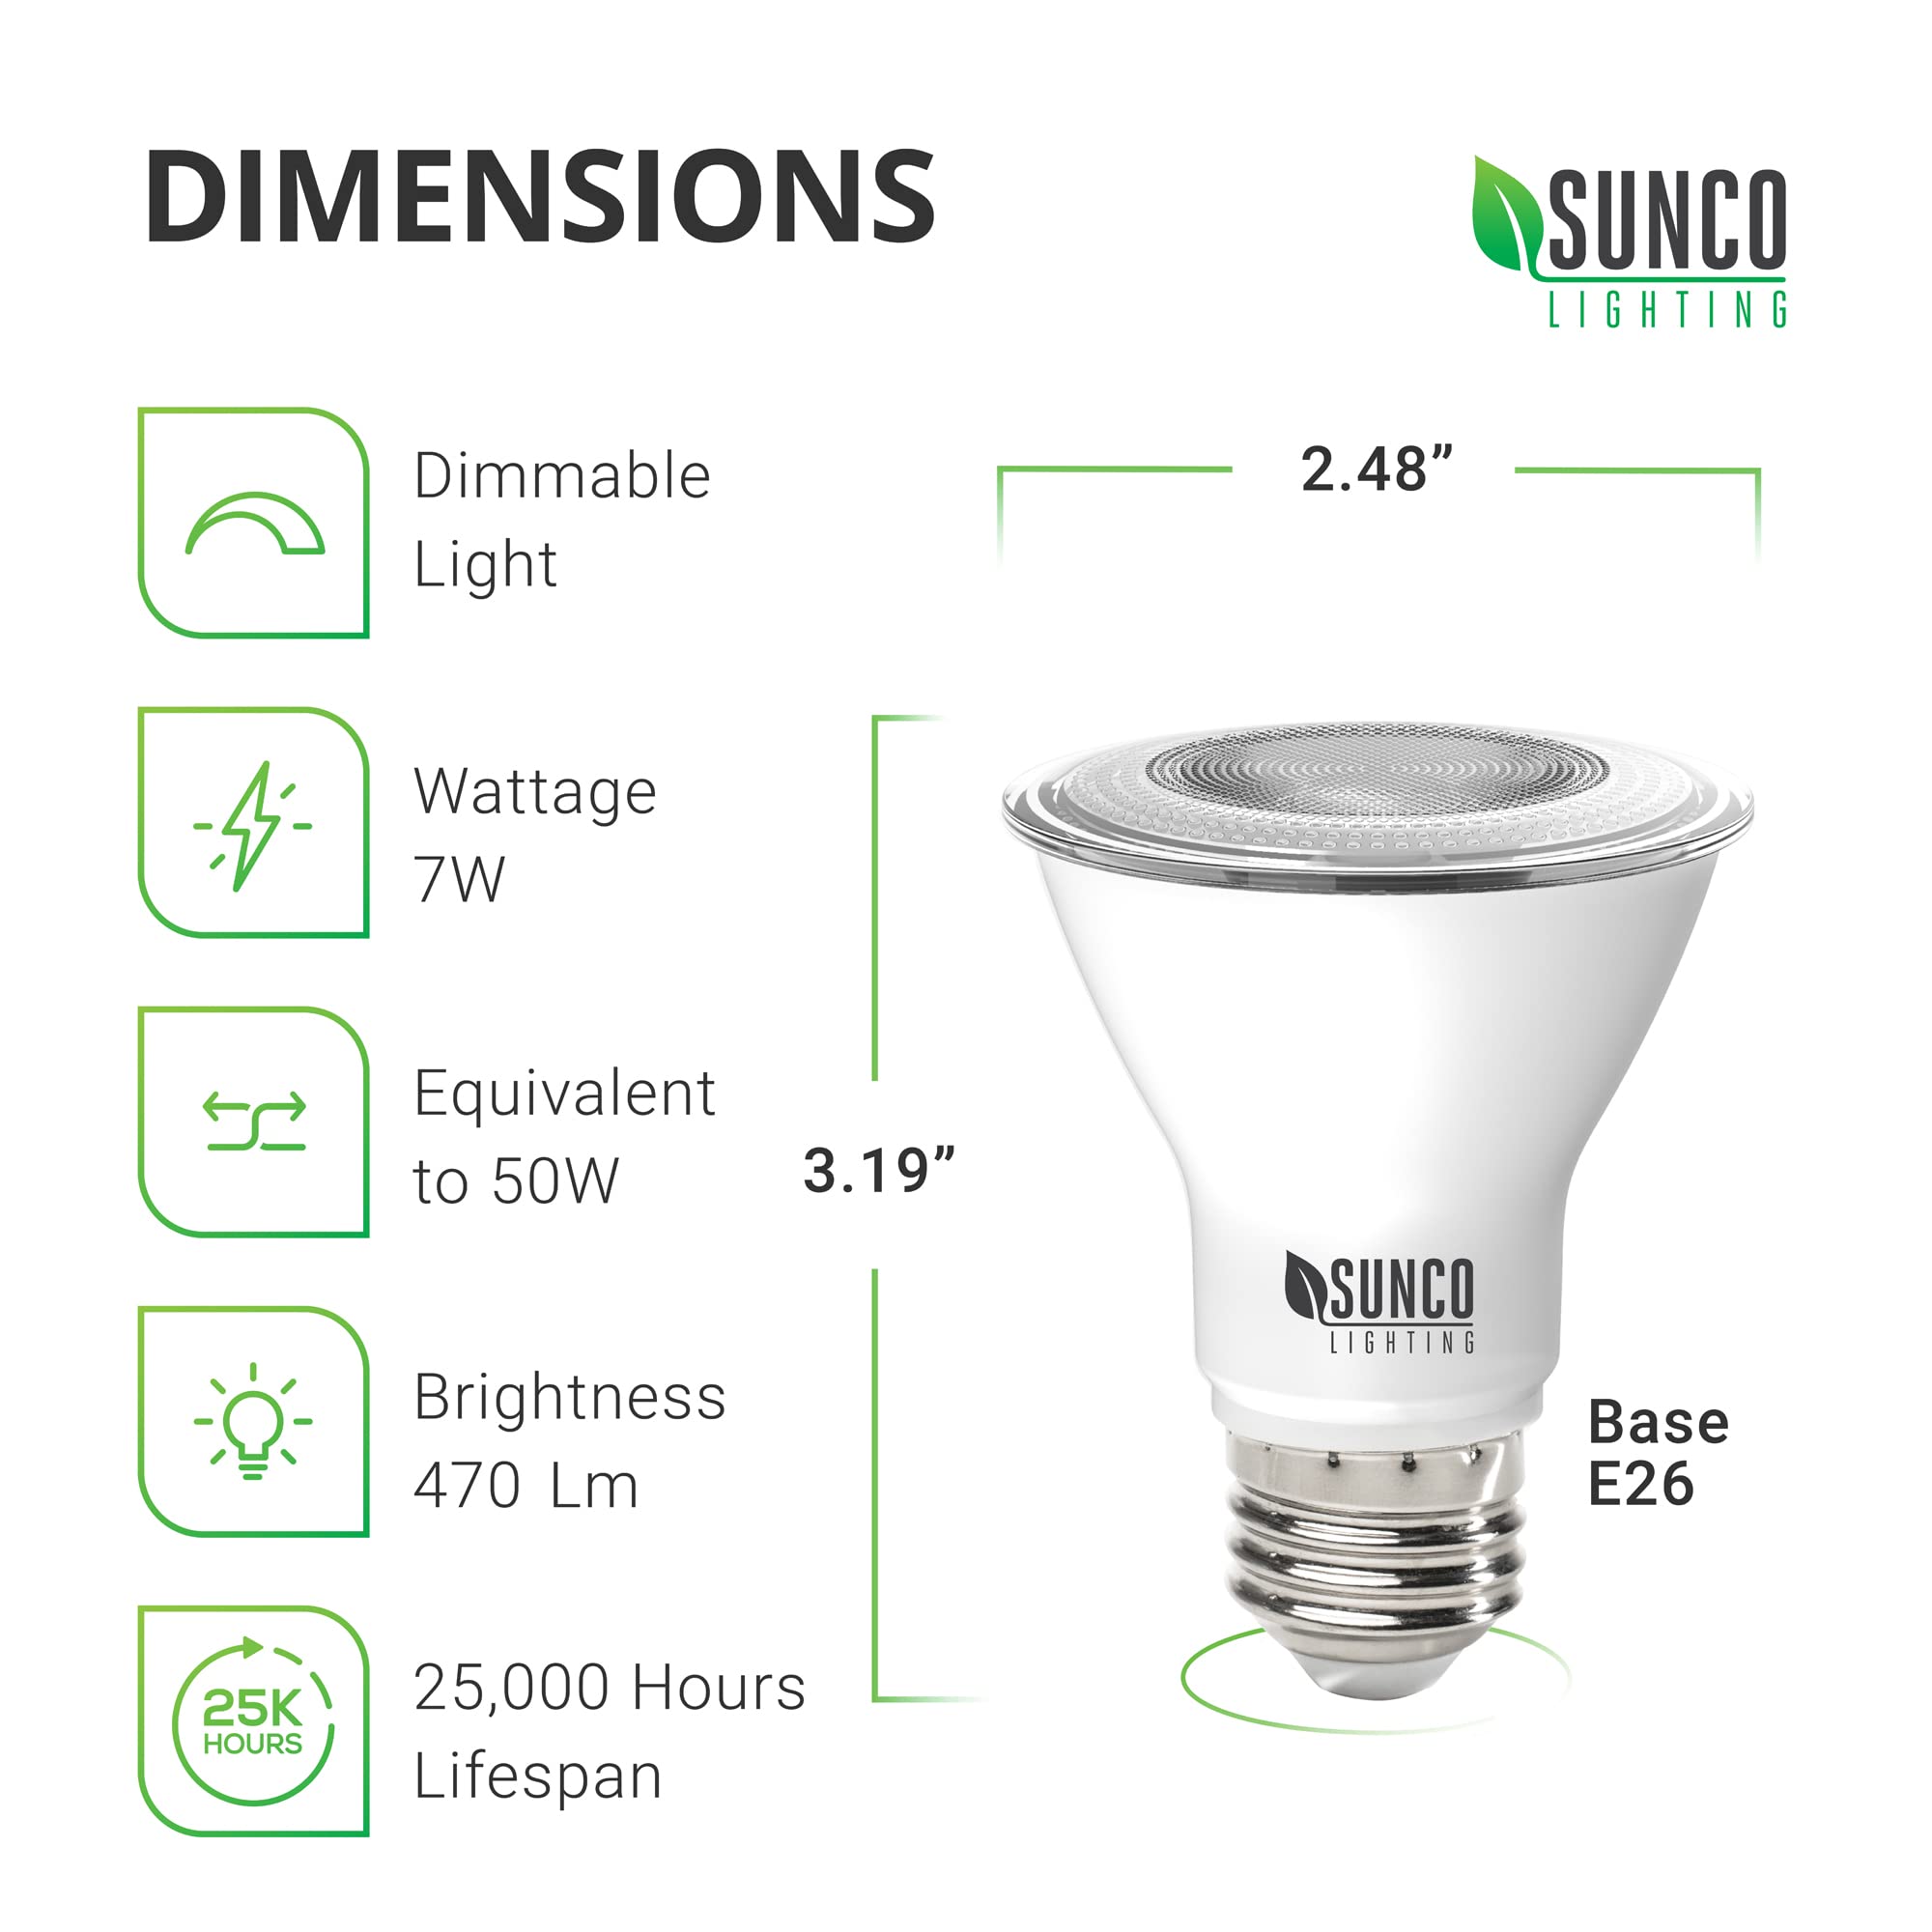 Sunco 10 Pack PAR20 LED Bulbs 50W Equivalent 7W, Dimmable 3000K Warm White, 470 LM, E26 Medium Base, IP65 Waterproof, Indoor Outdoor Flood Light - UL